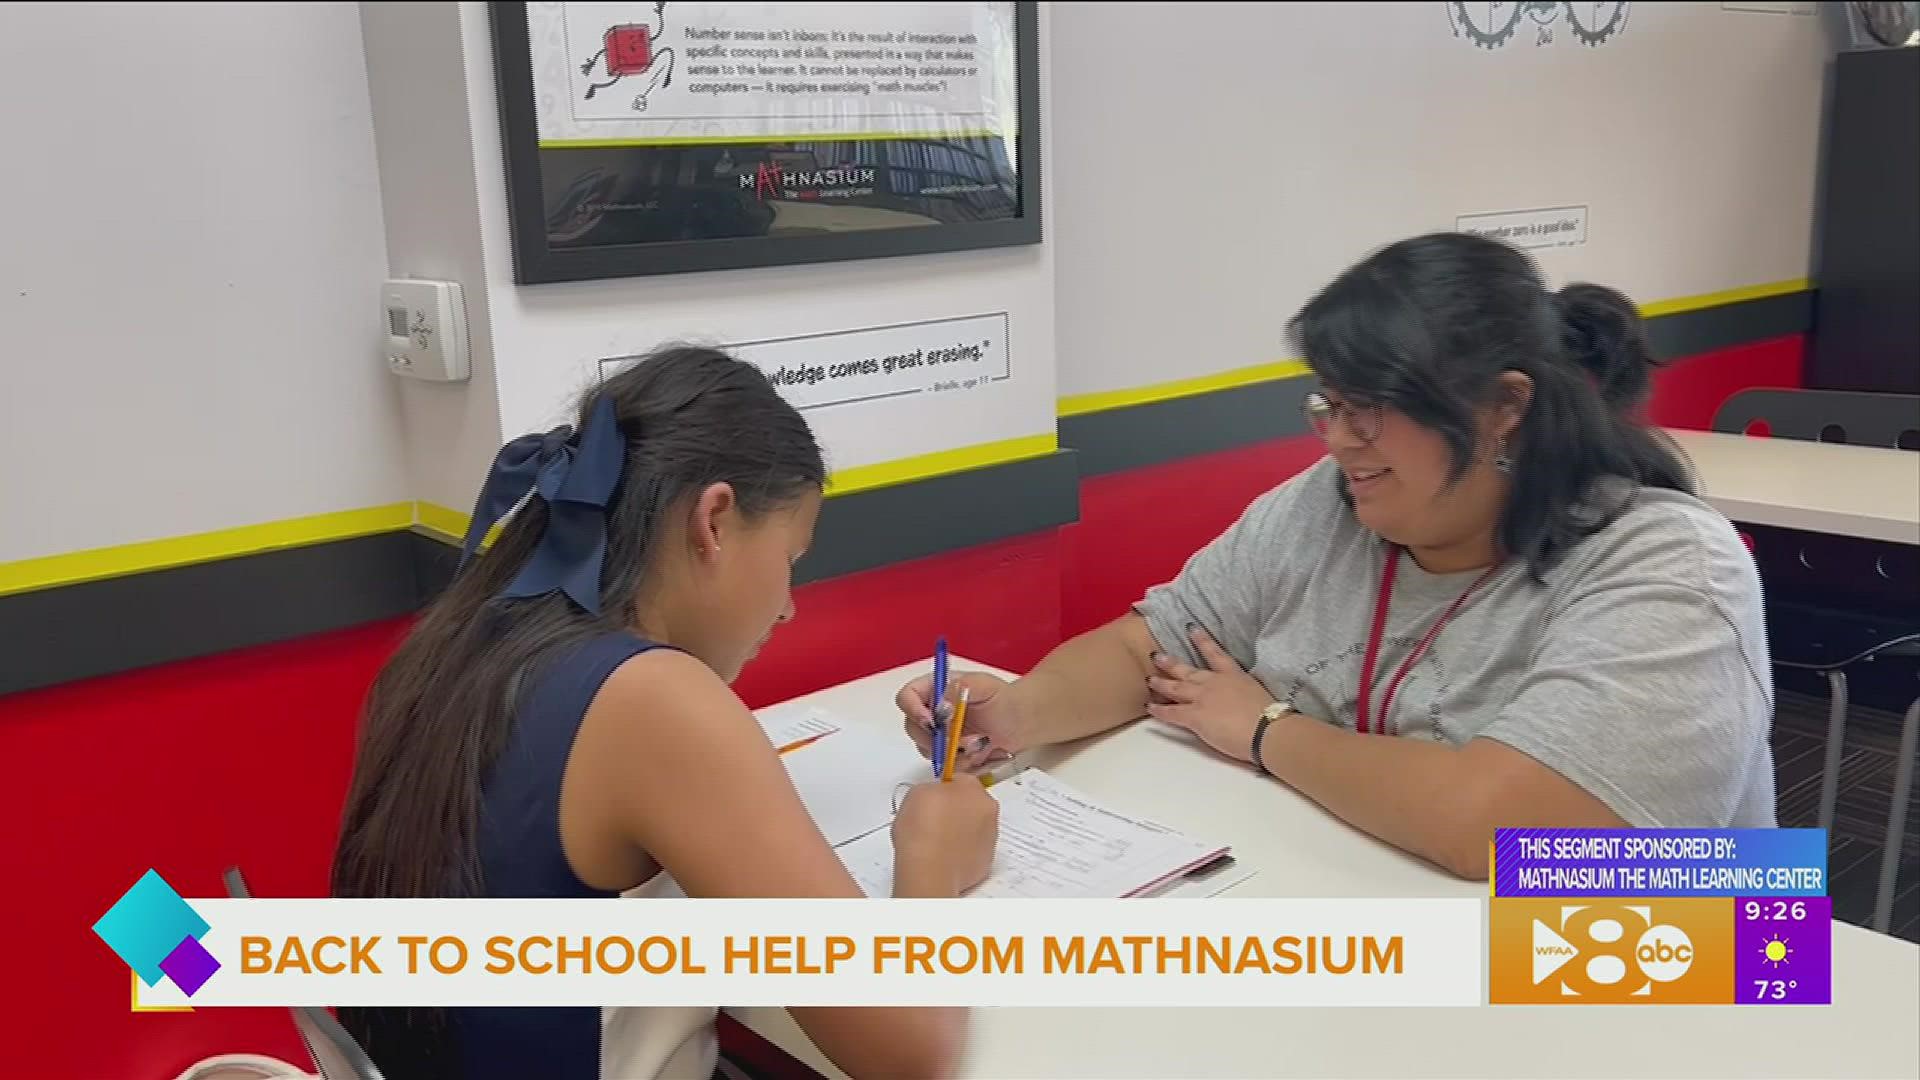 This segment is sponsored by Mathnasium: The Math Learning Center.